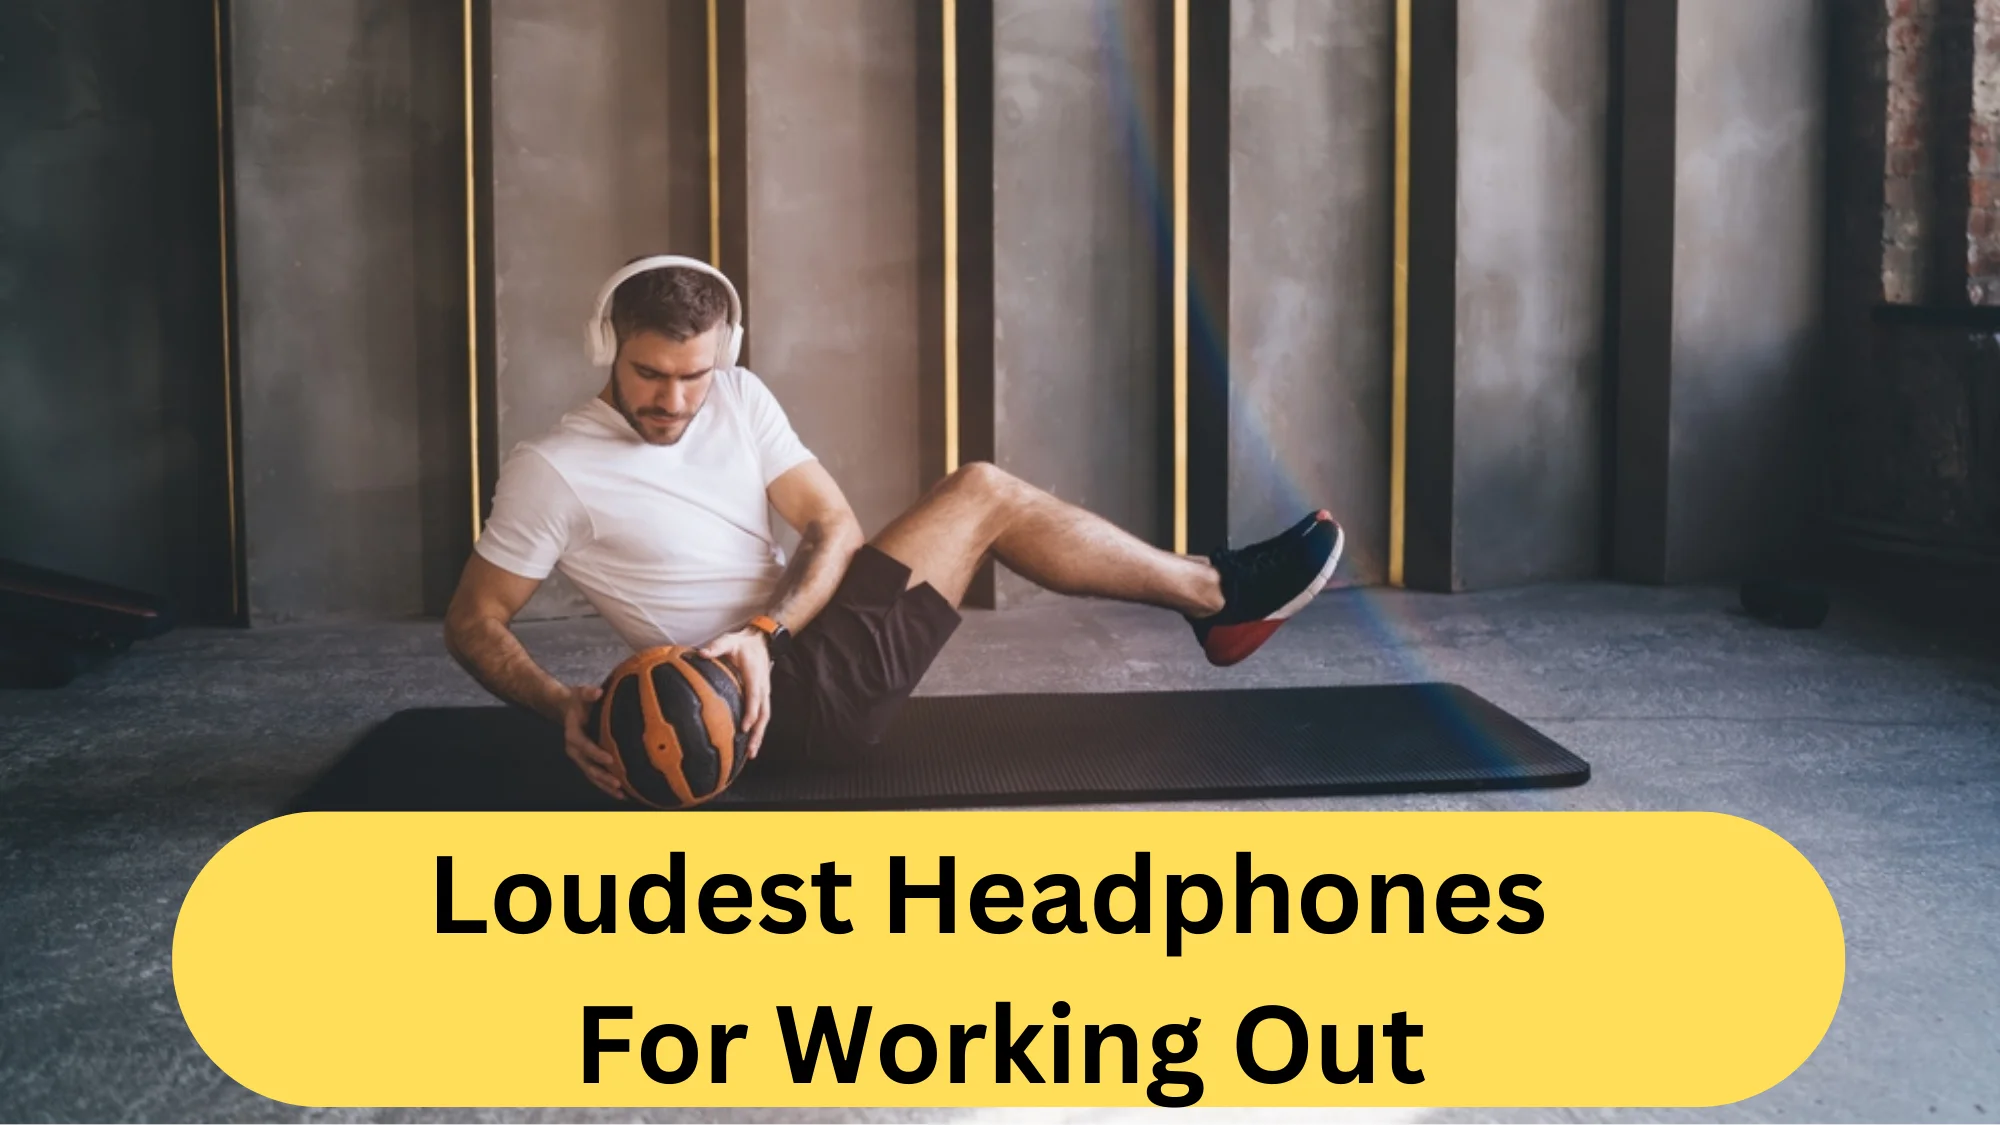 Loudest Headphones For Working Out